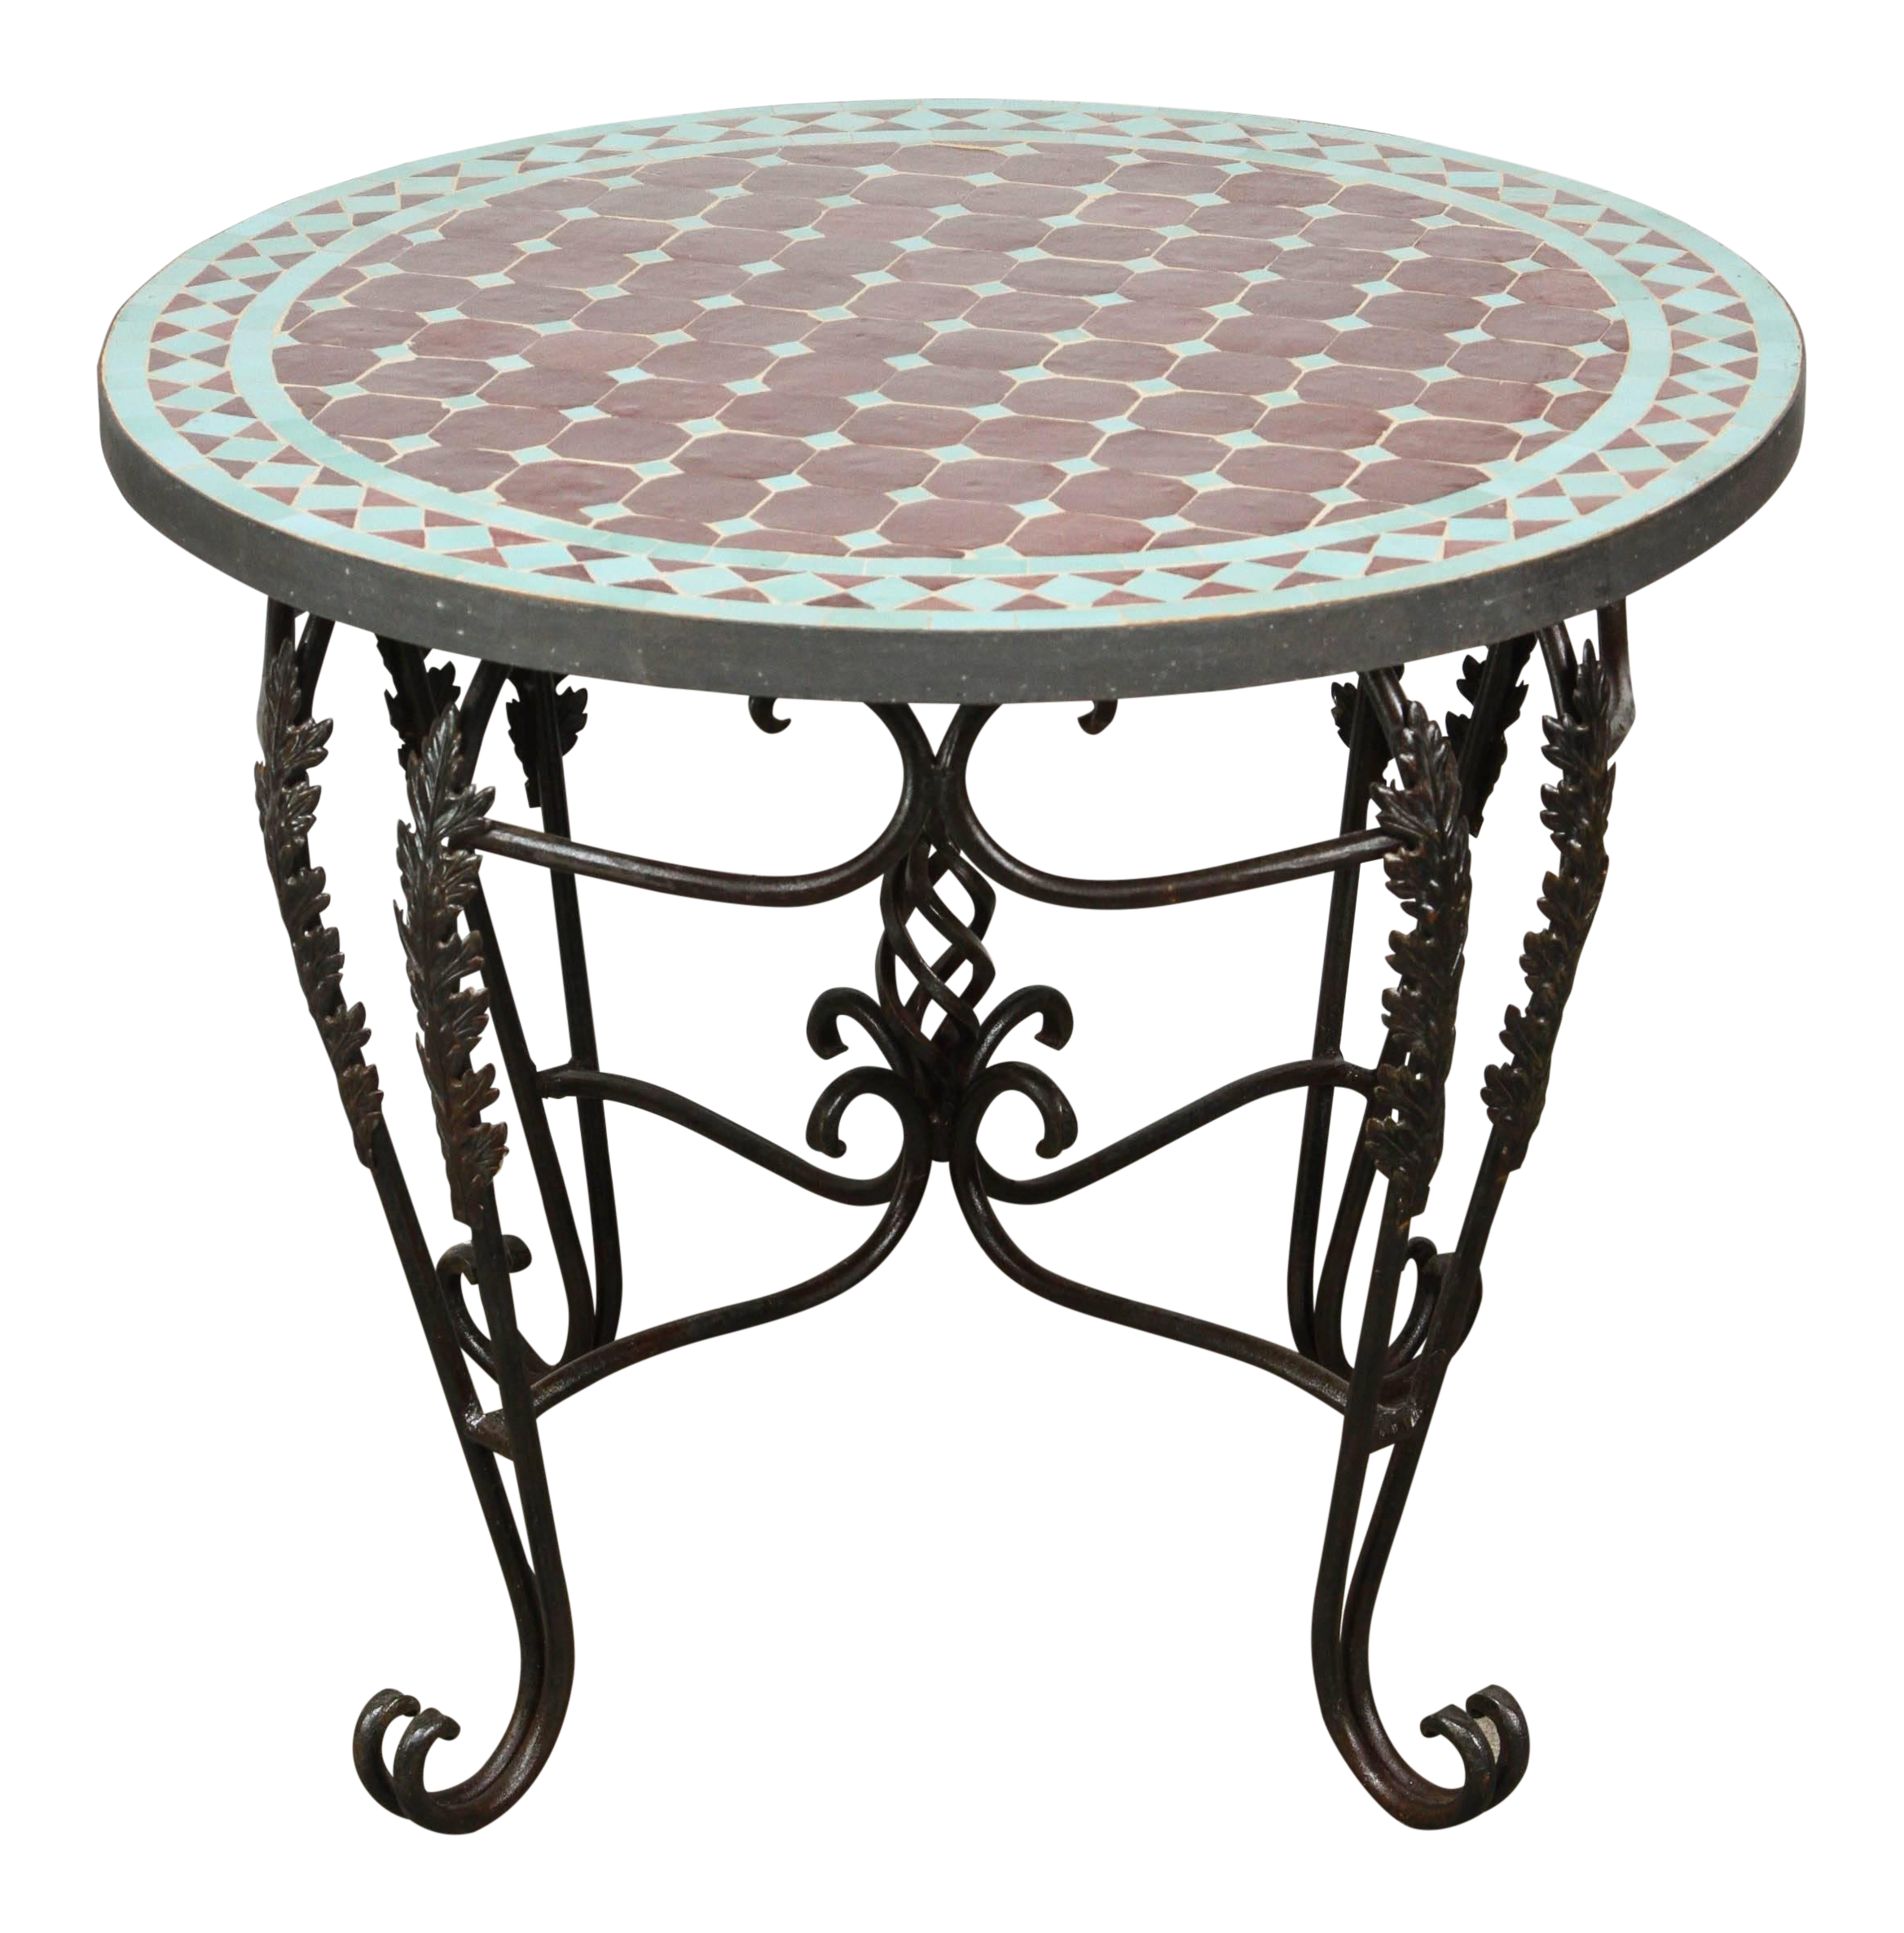 fine moroccan round mosaic tile side table indoor outdoor decaso accent small blue lamp couches for spaces hammered drum baby changing unit gold leaf grill chef west elm white